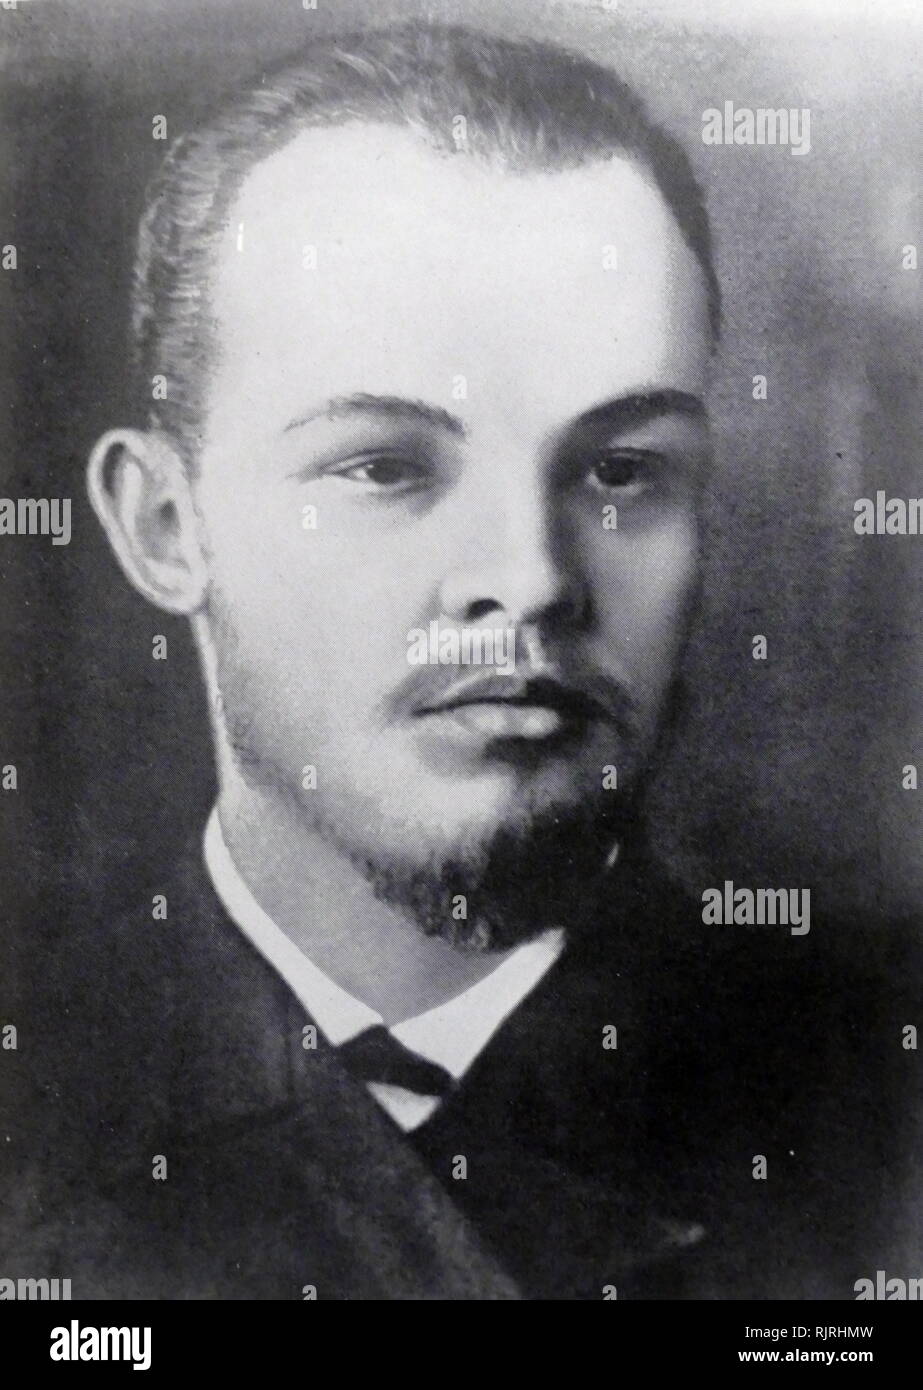 Vladimir Ilyich Ulyanov, known by the alias Lenin (1870 - 1924), Russian communist revolutionary, politician and political theorist. He served as head of government of Soviet Russia from 1917 to 1924 and of the Soviet Union from 1922 to 1924. Under his administration, Russia and then the wider Soviet Union became a one-party communist state governed by the Russian Communist Party. Ideologically a Marxist, he developed political theories known as Leninism. Stock Photo